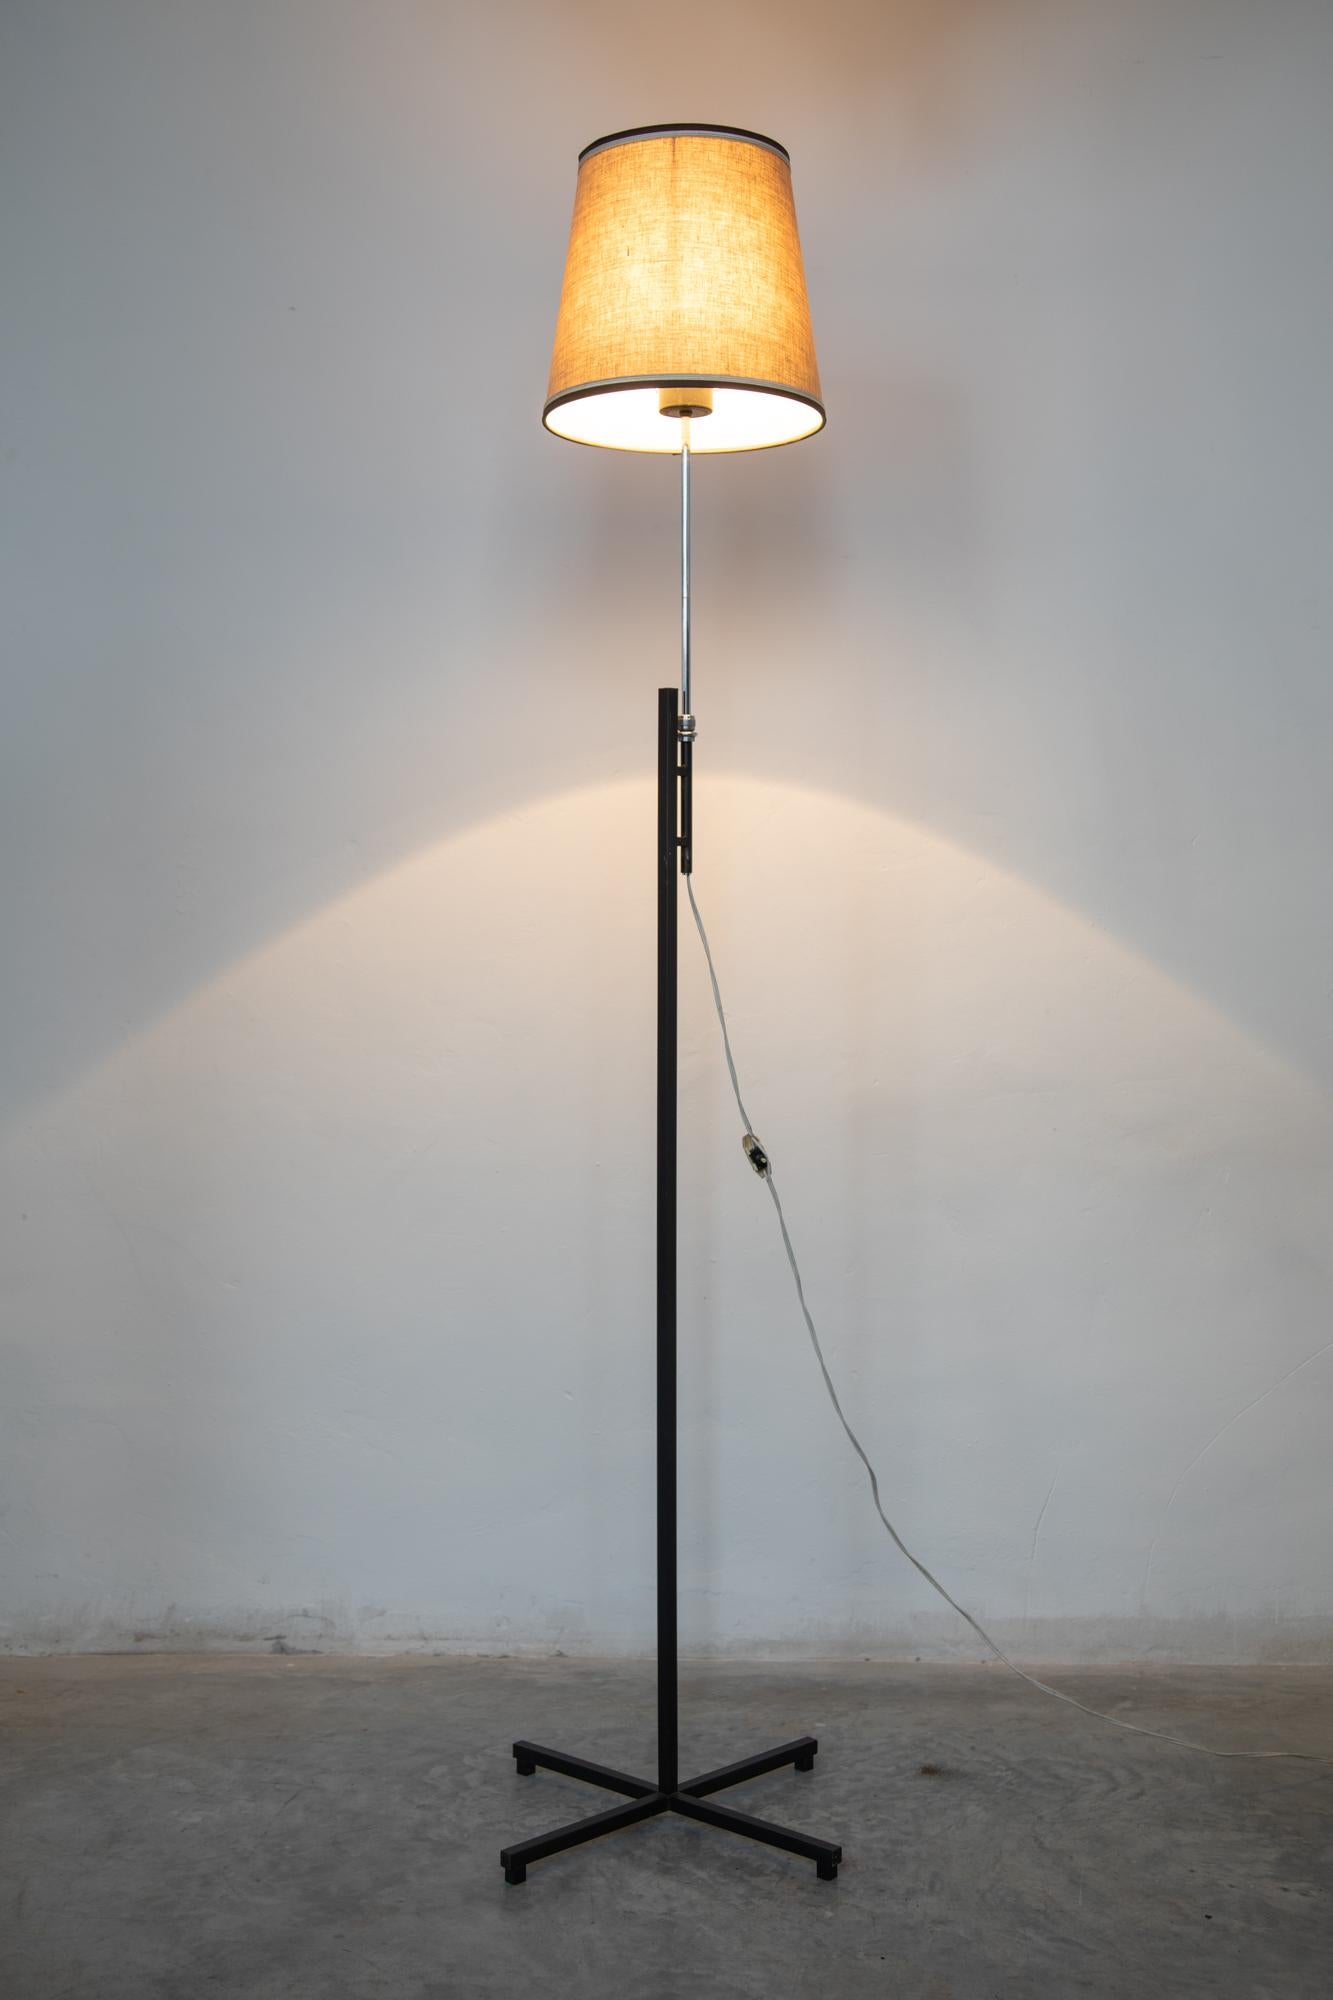 Minimal modern Roger Fatus floor lamp for Disderot, 1960s with cylindrical metal tripod base and can be raised or lowered. Adjustable in height, surmounted by a cream lamp shade all in very good vintage working condition. Measures: 45 W x 145 H x 45